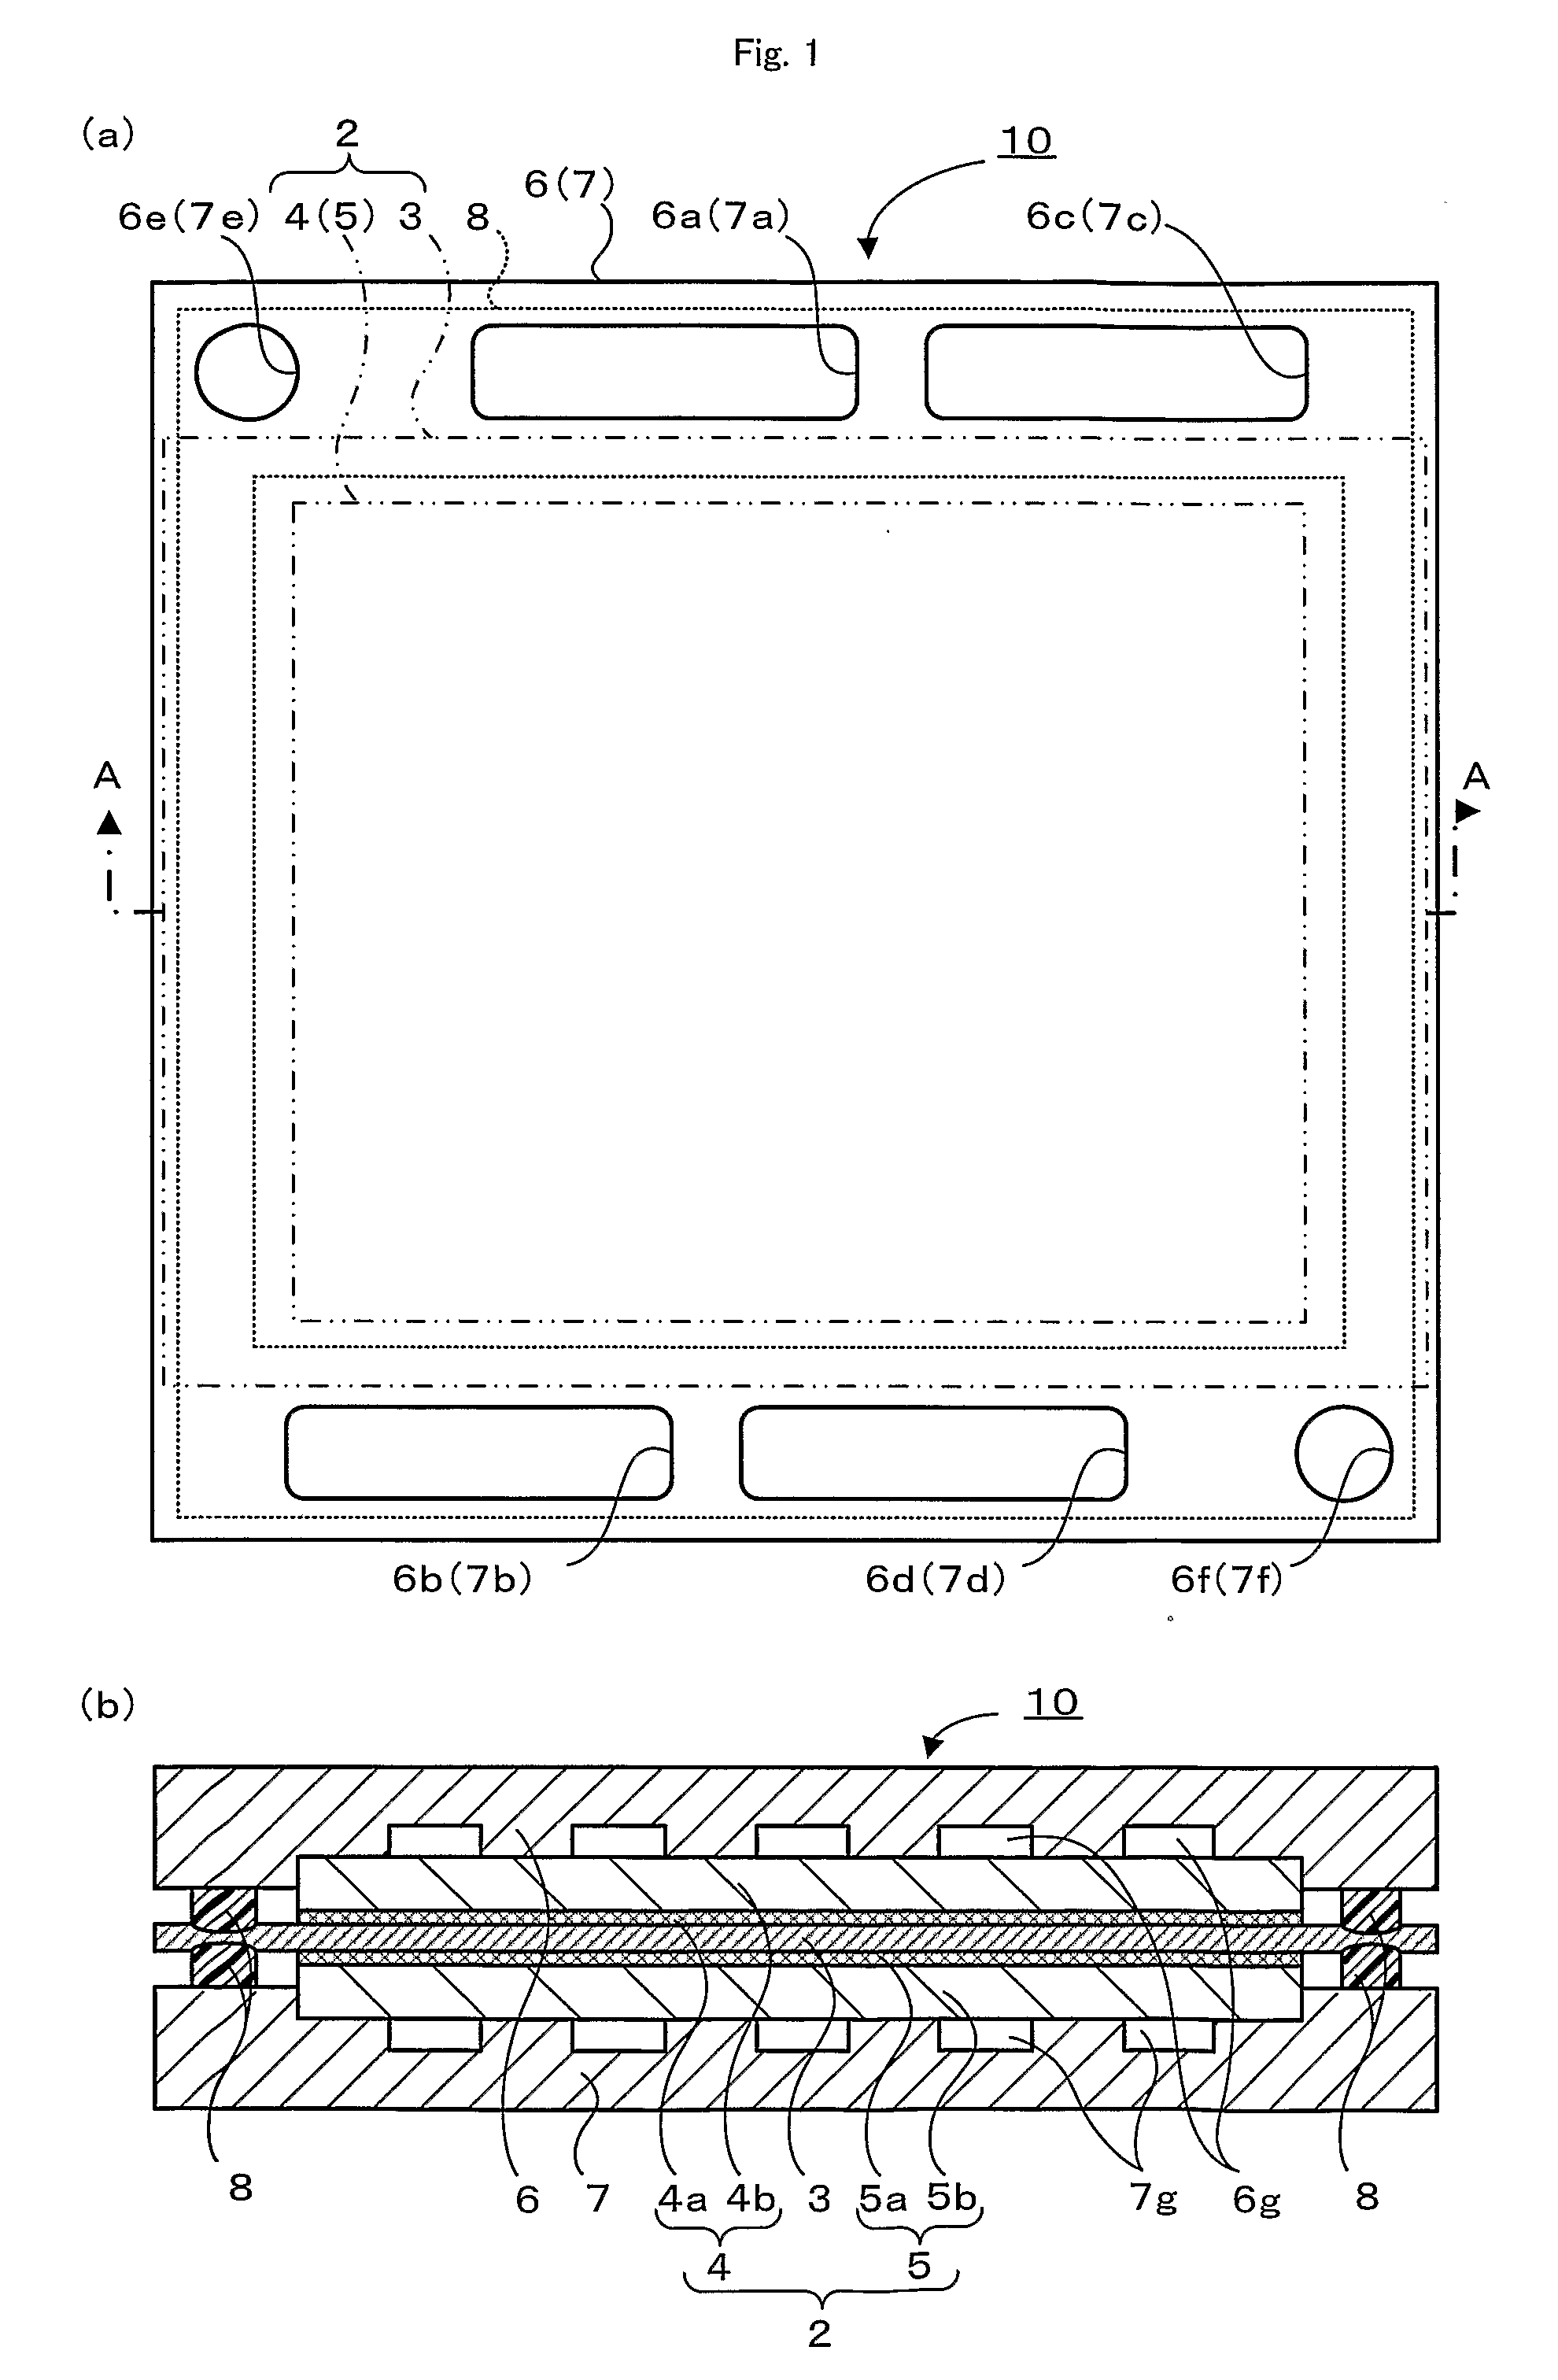 Fuel cell disassembly method